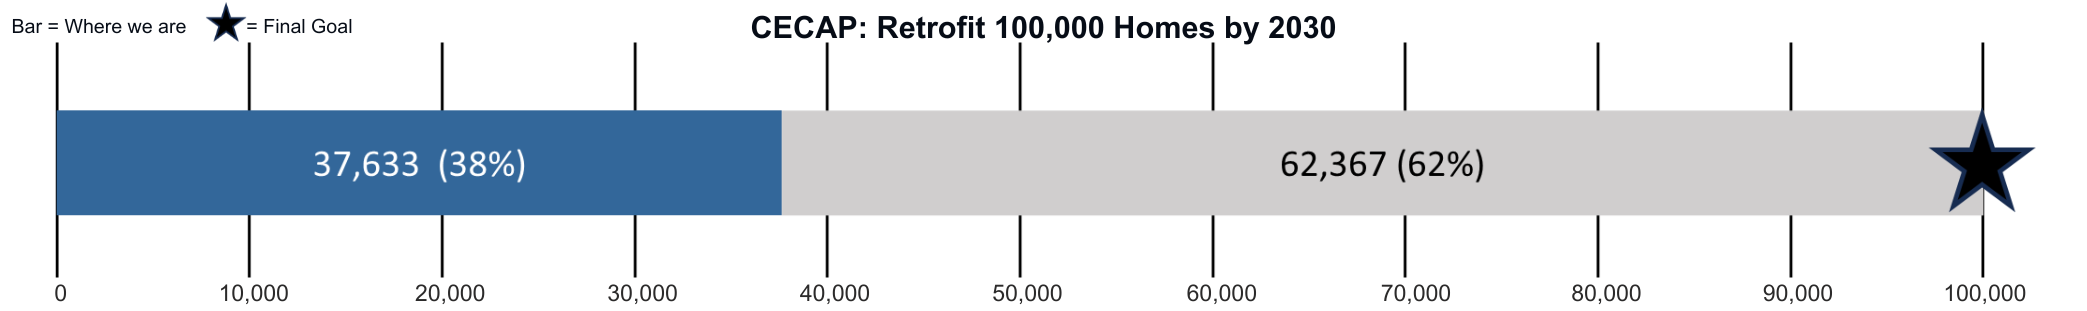 CECAP_ Retrofit at least 100,000 homes with energy efficiency improvements by 2030 goal bar showing a 38% progress bar